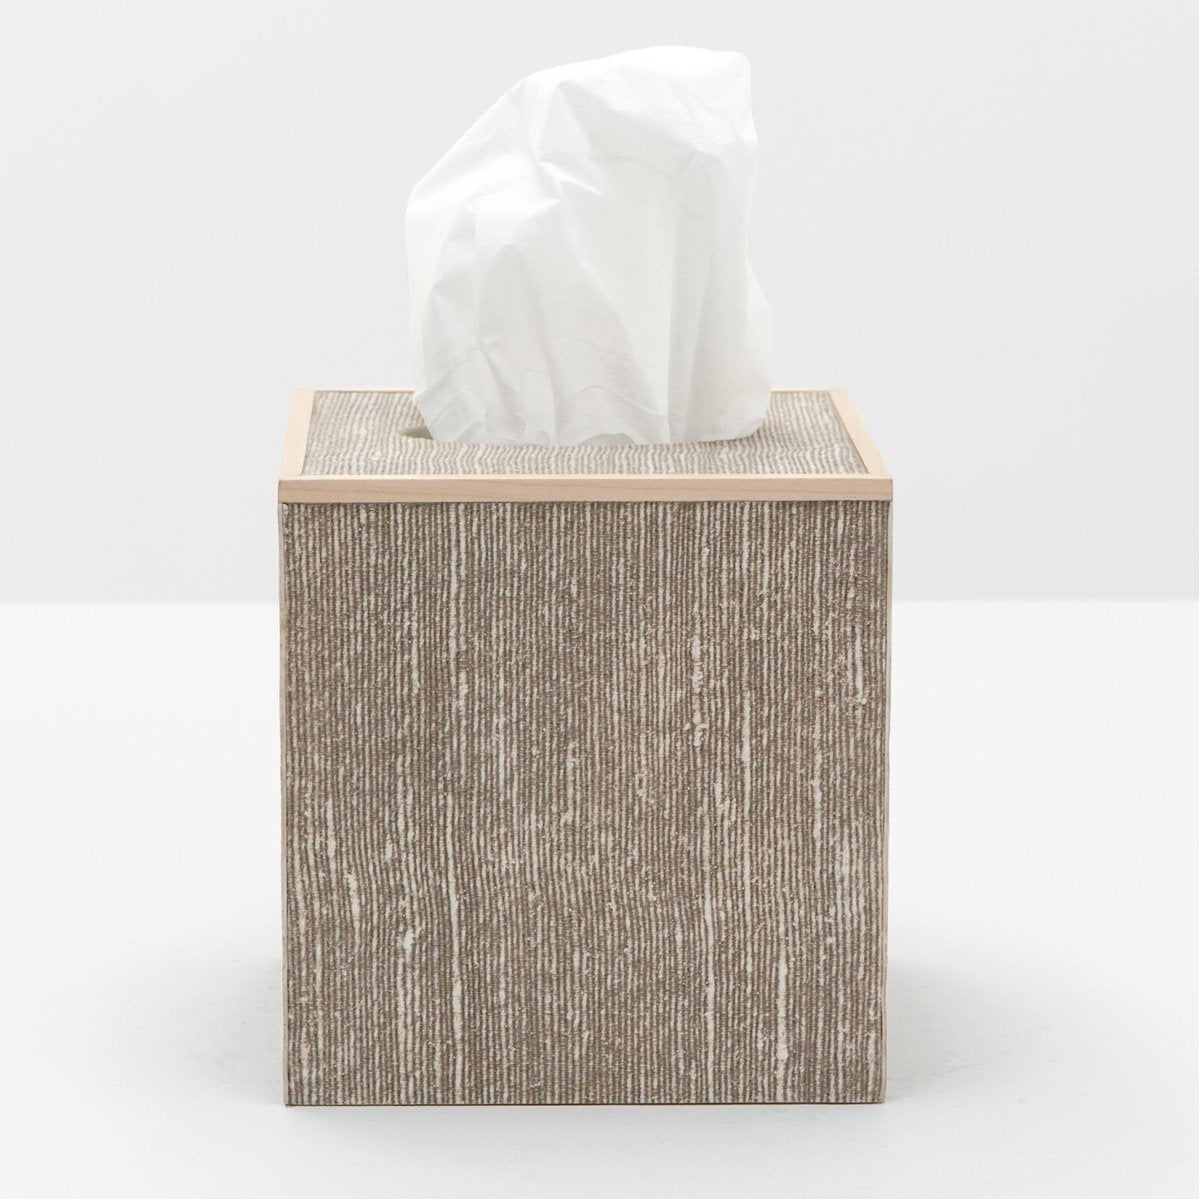 Pigeon and Poodle Bruges Tissue Box, Square